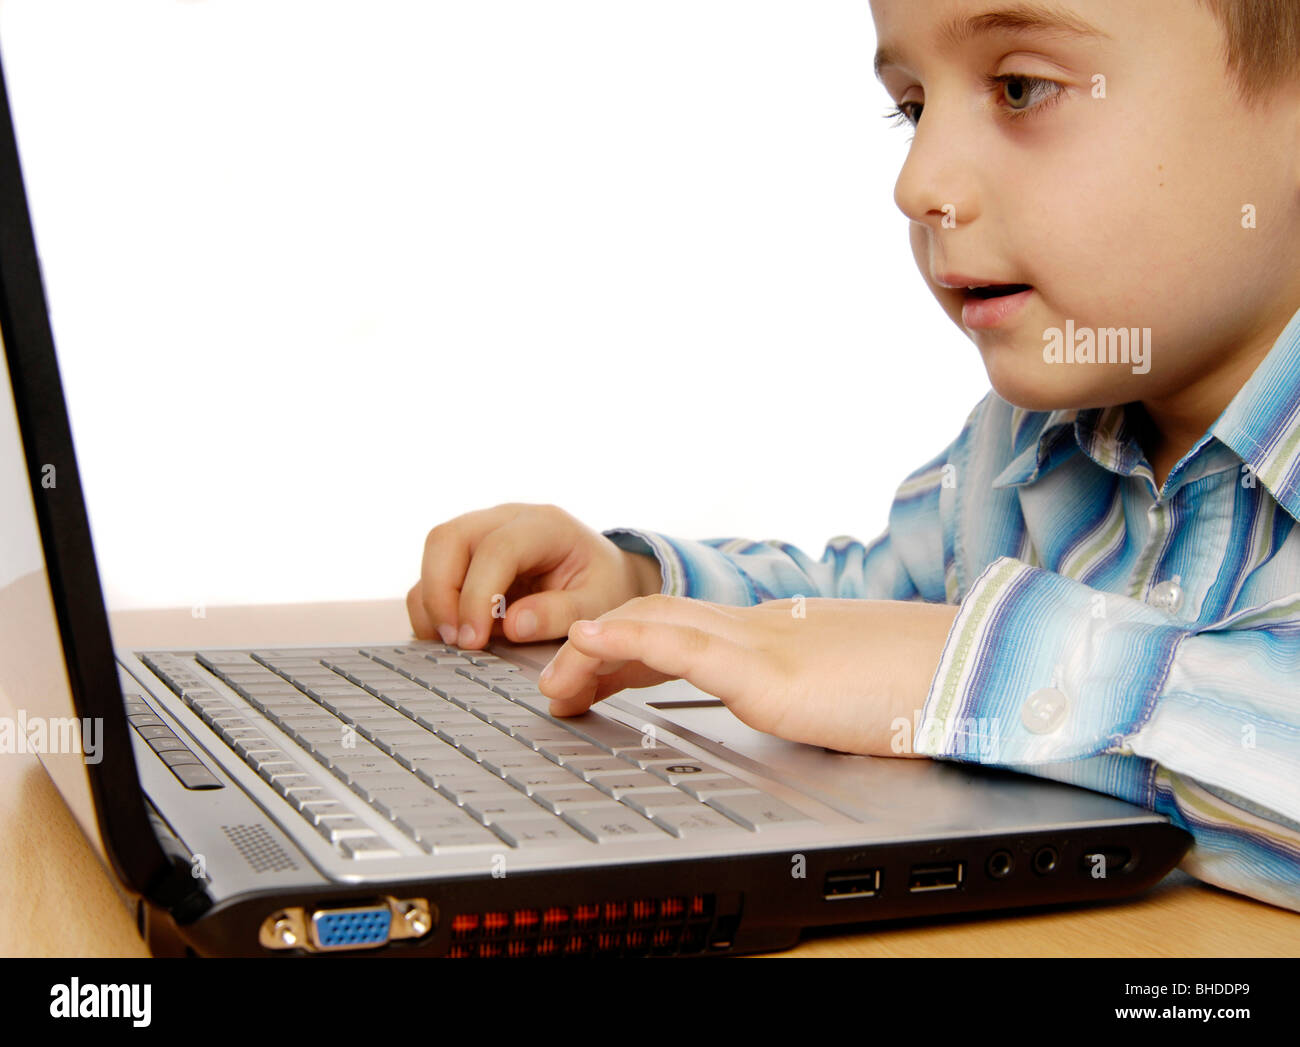 Young computer geek Stock Photo